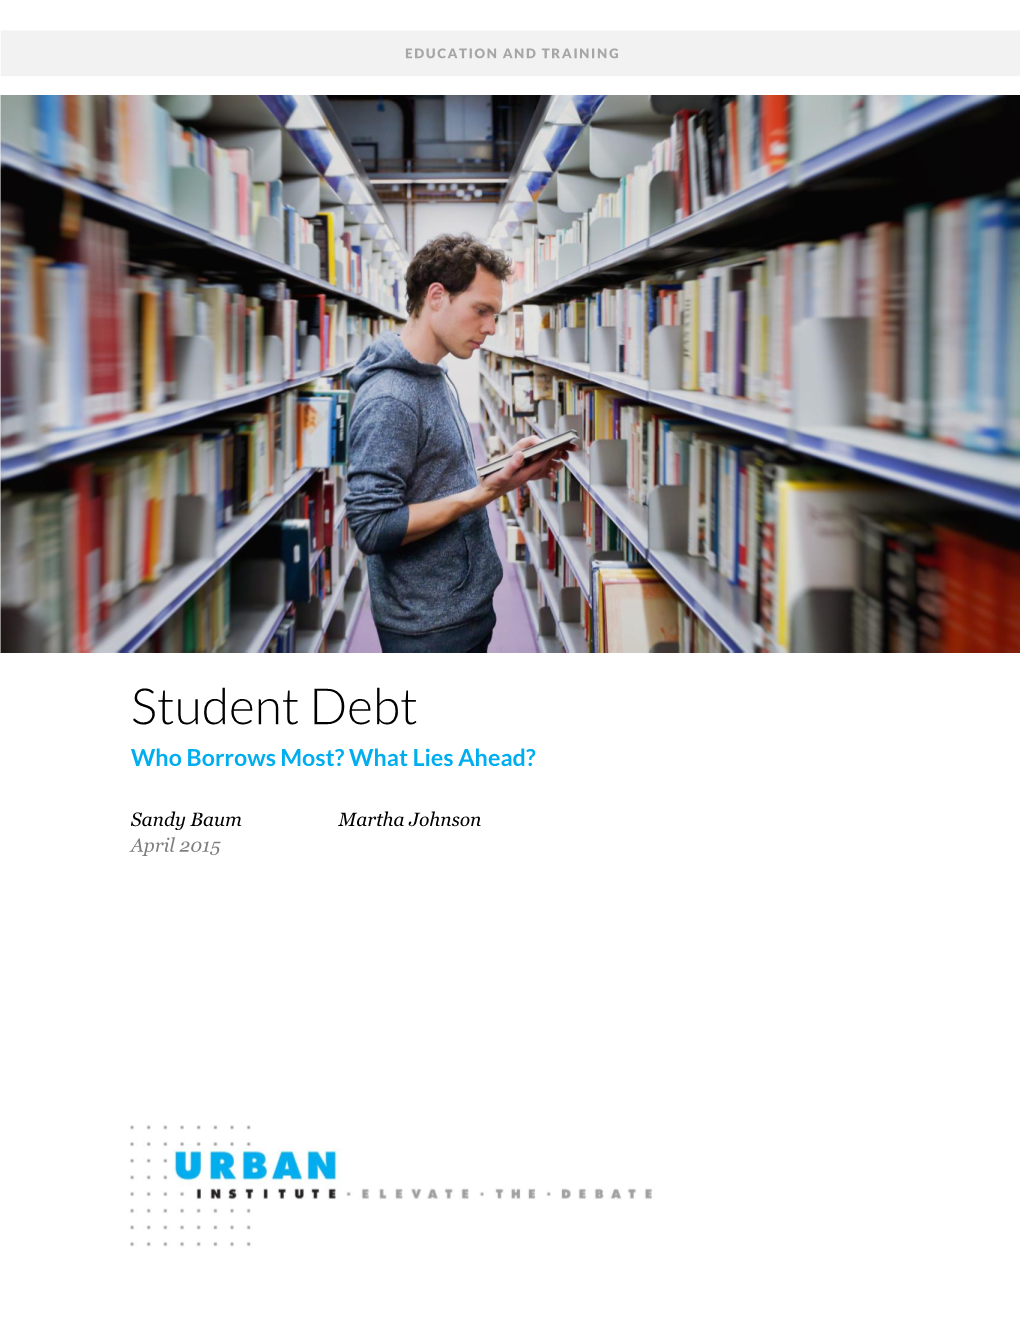 Student Debt: Who Borrows Most? What Lies Ahead?